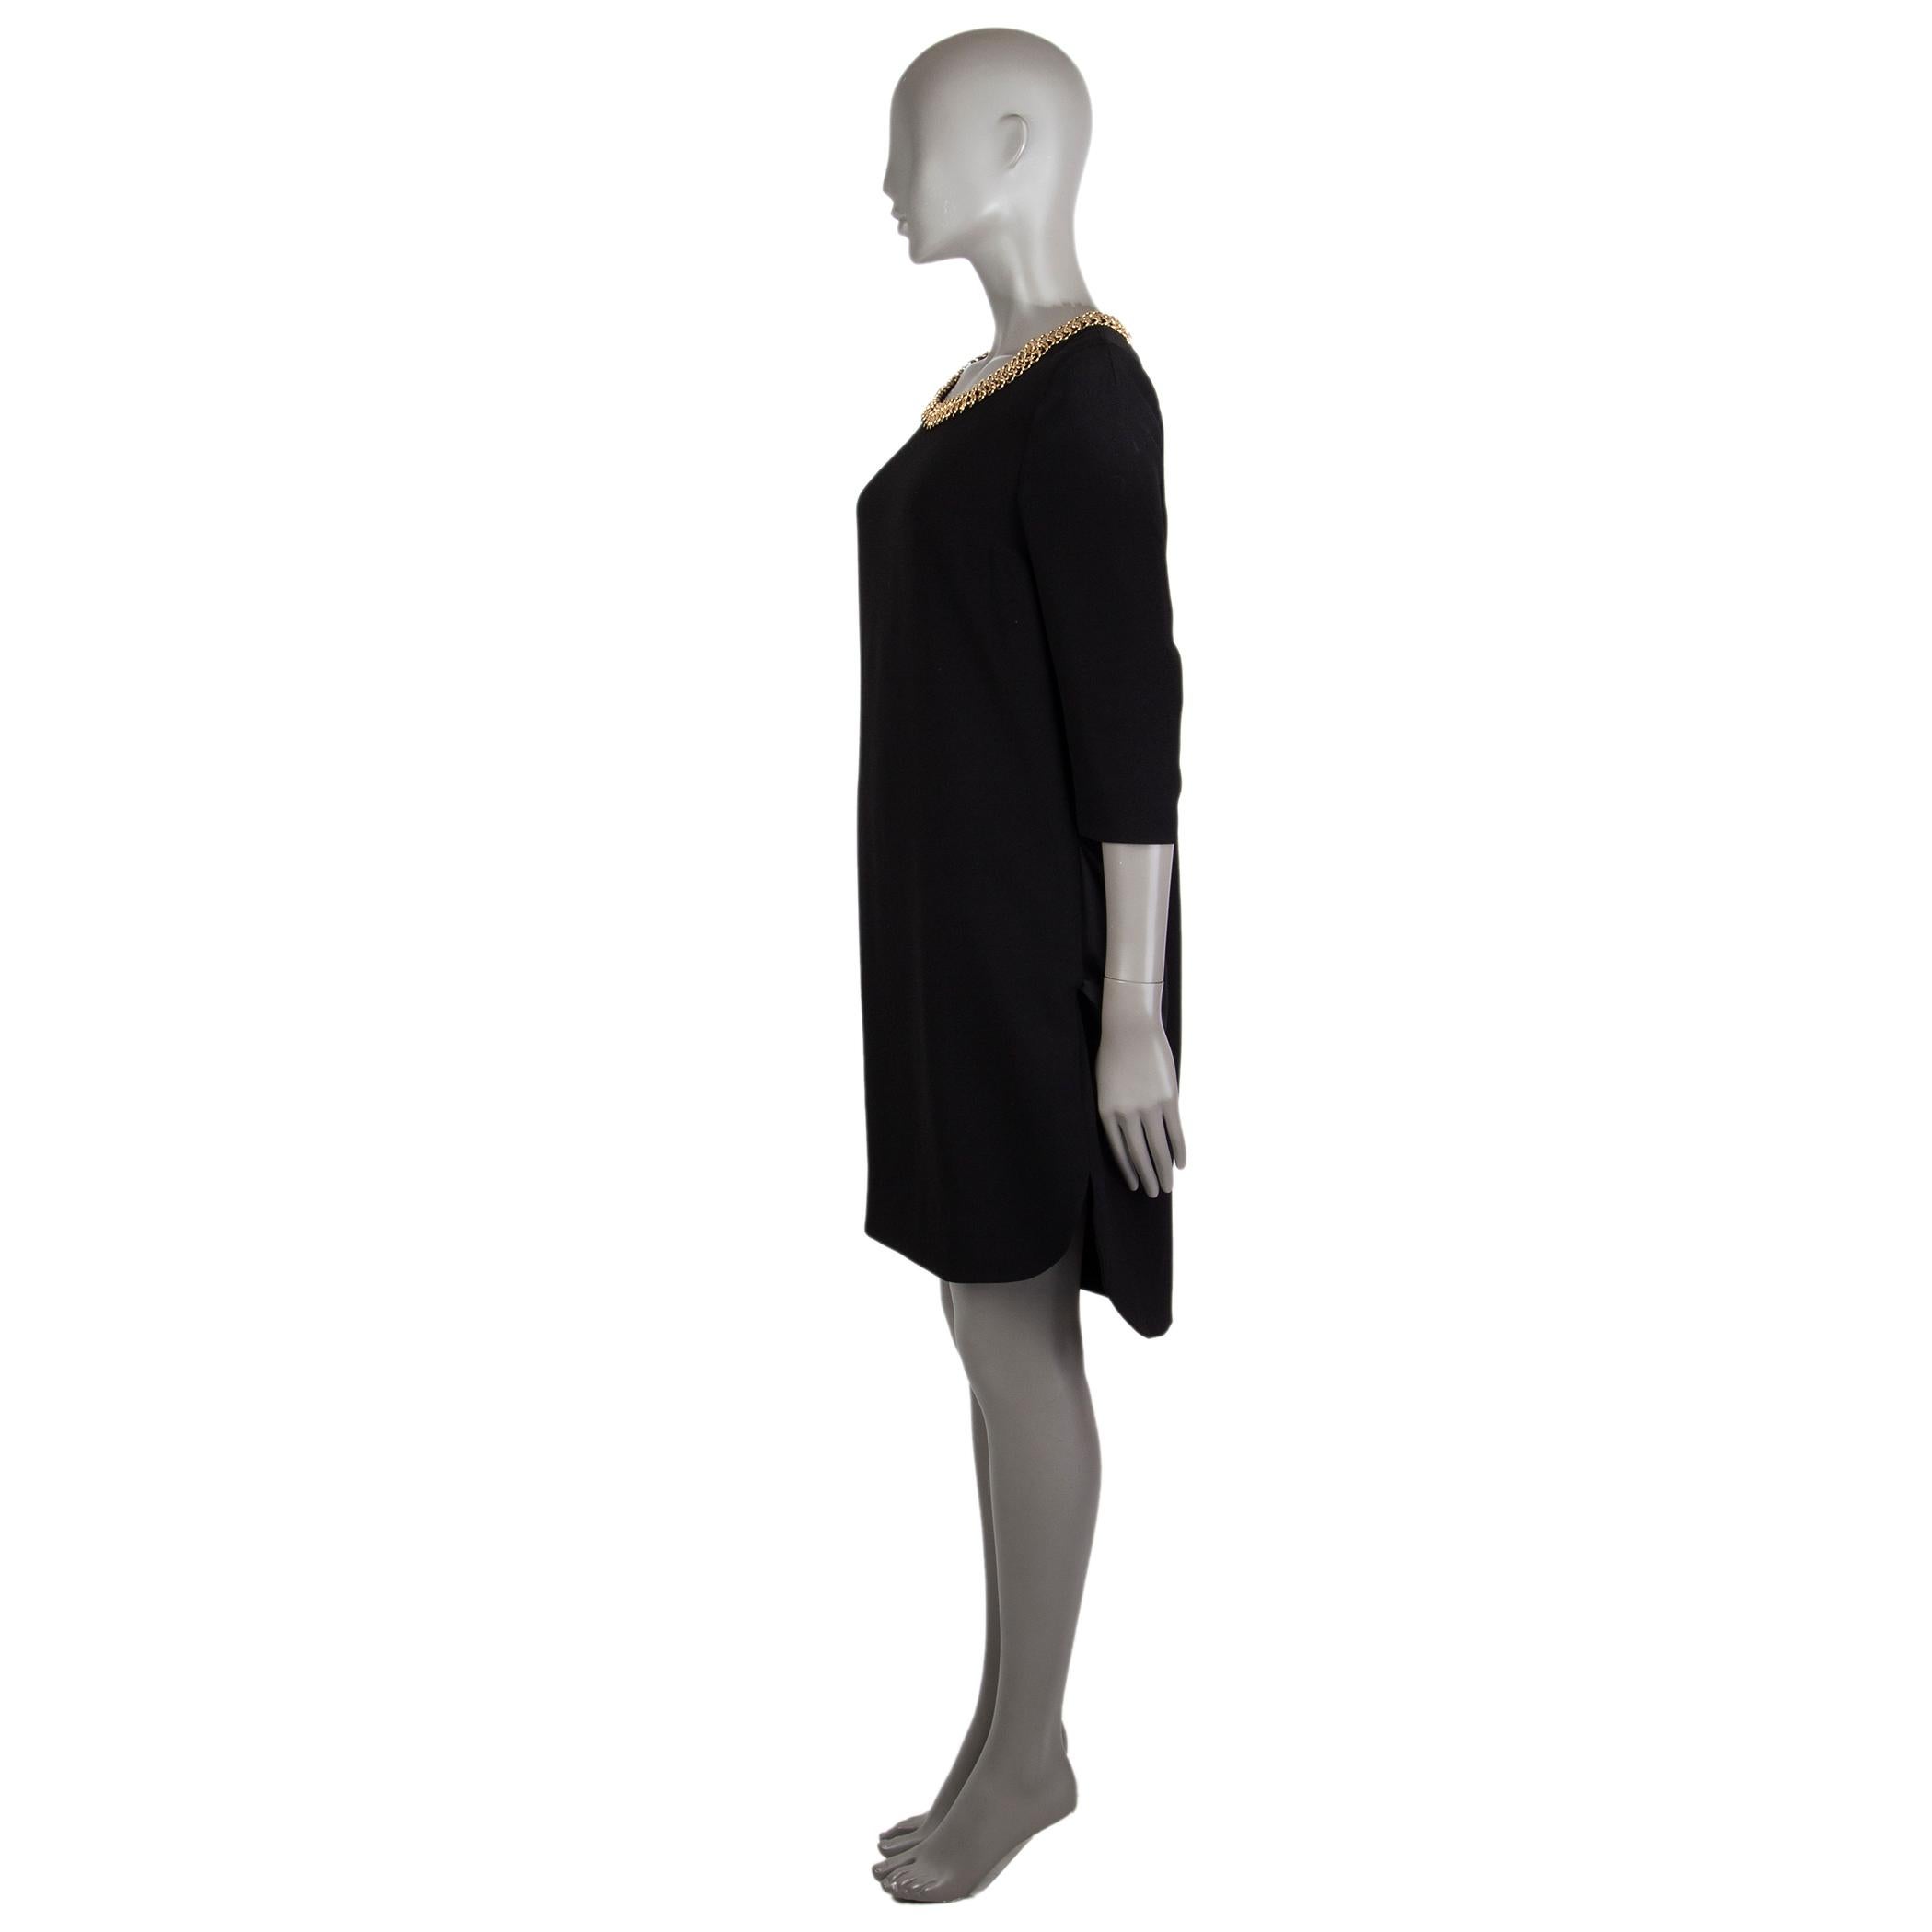 100% authentic Burberry 3/4-sleeve shift dress in black acetate (78%) and polyester (22%) with a gold chain detail round neck. Closes on the back with a concealed zipper. Has side pockets. Lined in silk (93%) and elastane (7%). Brand new.